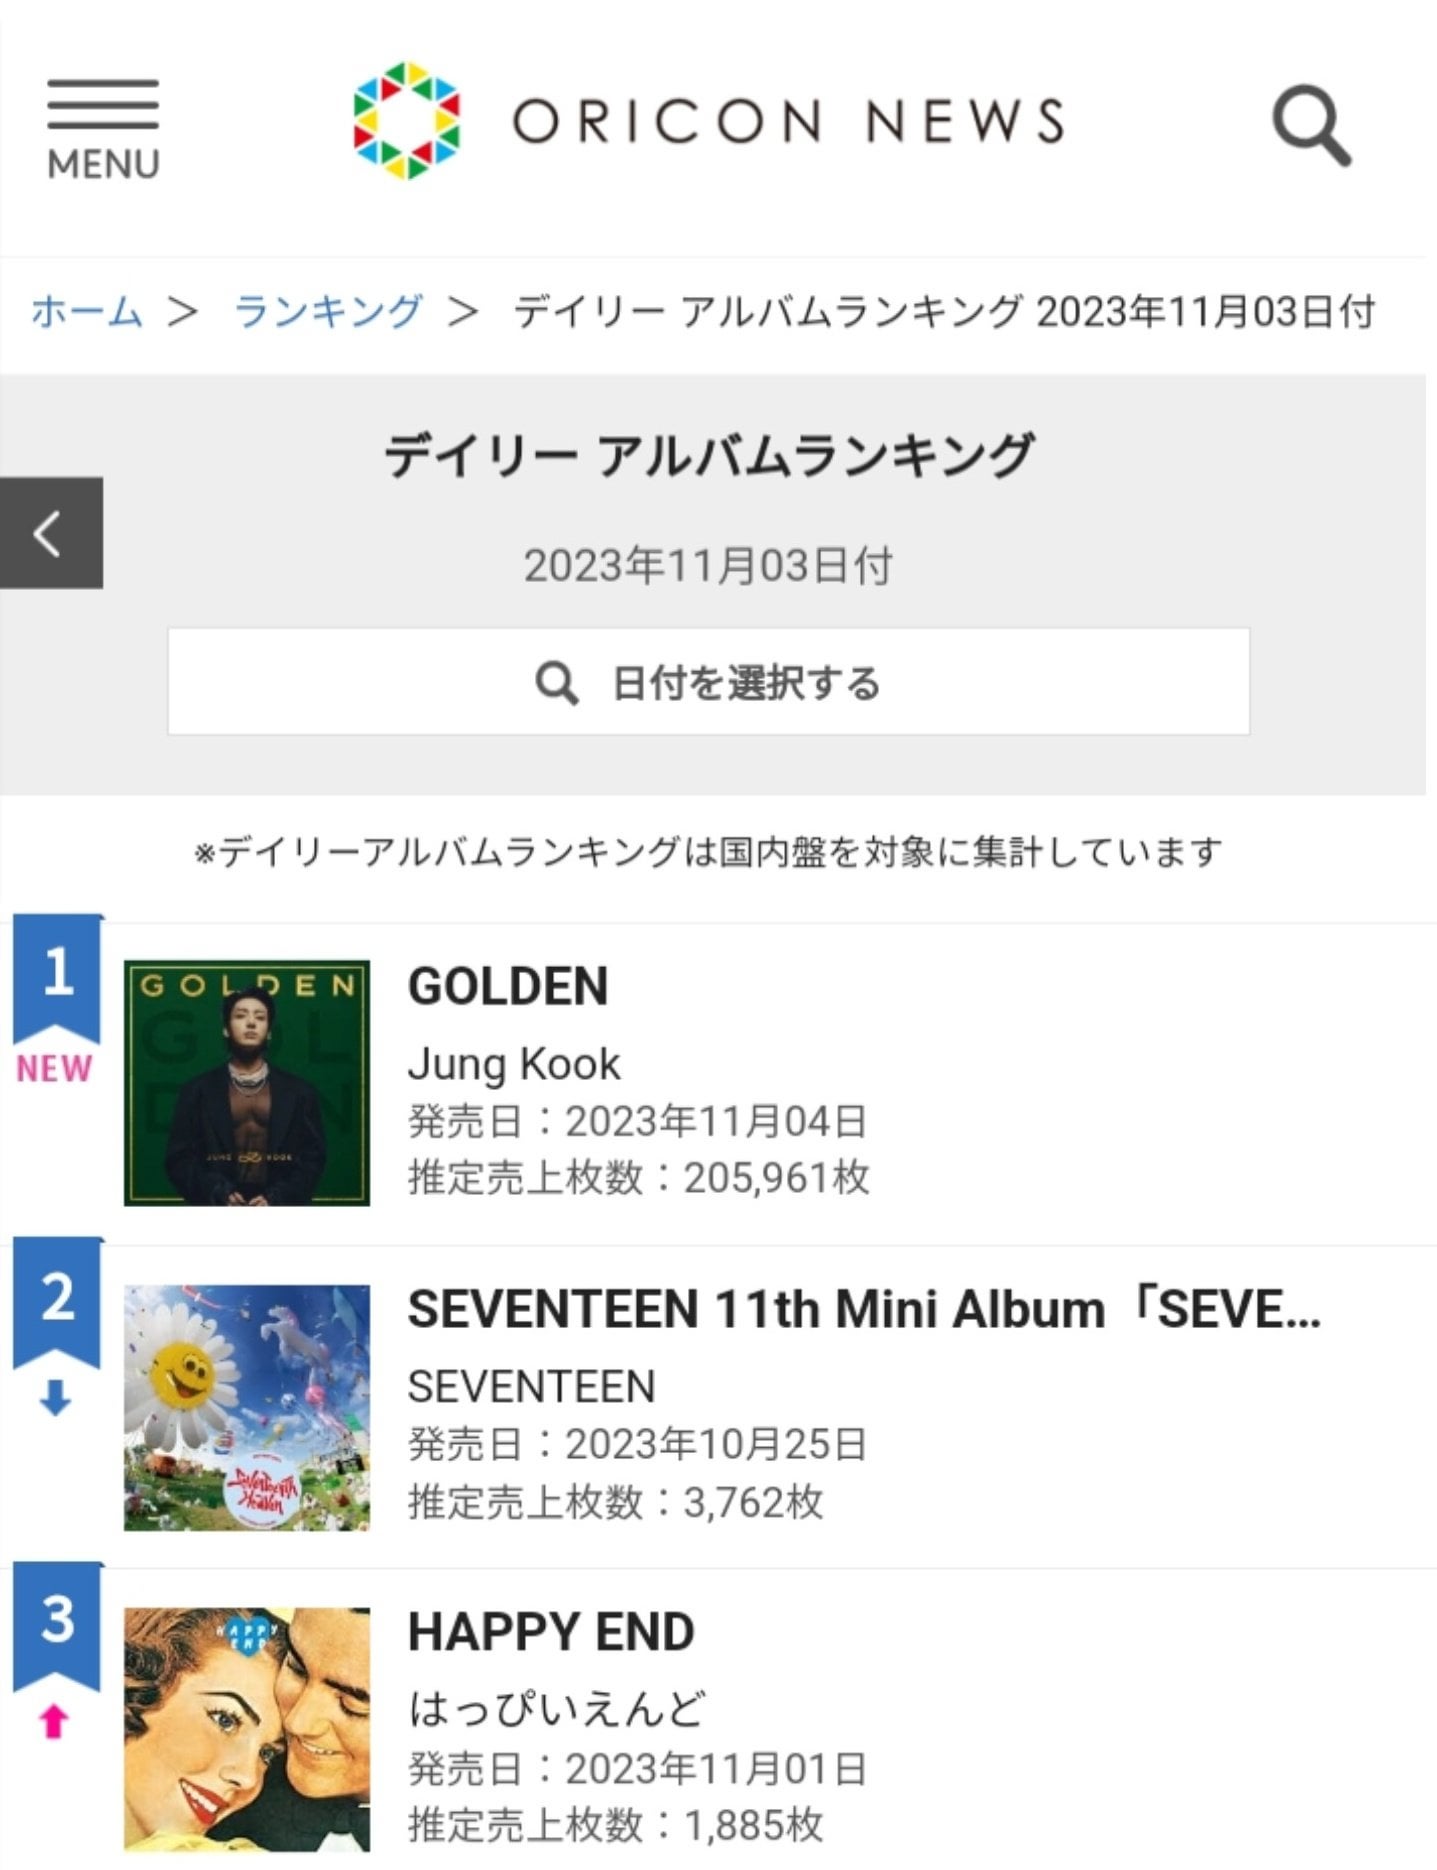 231105 "Golden" by Jung Kook officially debuted at #1 on the Oricon Daily Albums Chart with 205,961 copies sold in Japan on its release day!